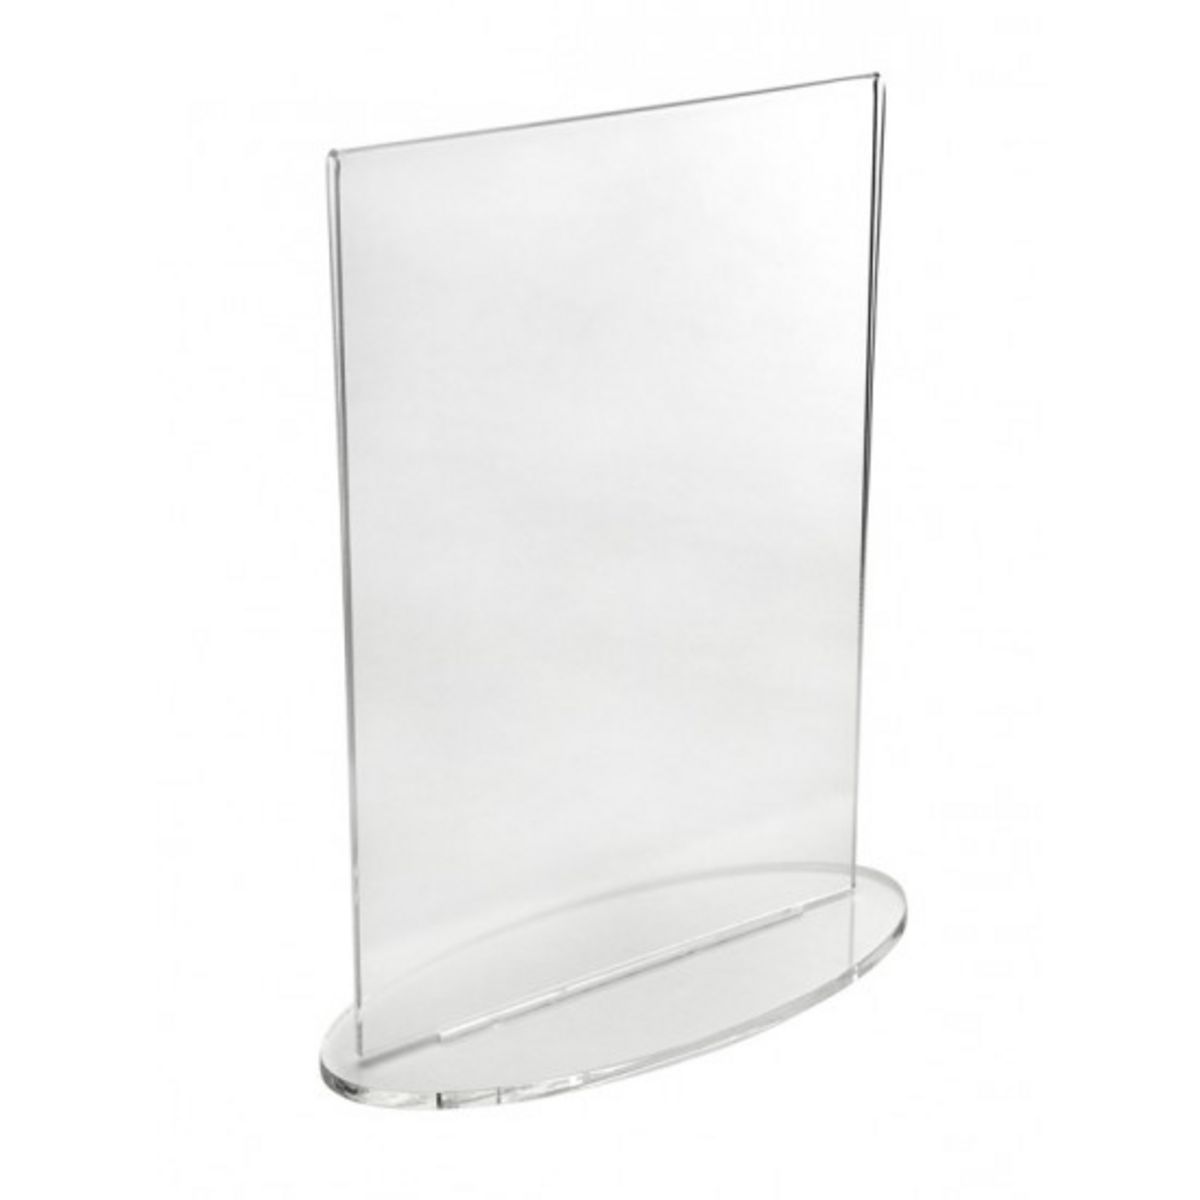 Double Sided Acrylic Poster Holder Portrait with an oval base.jpg